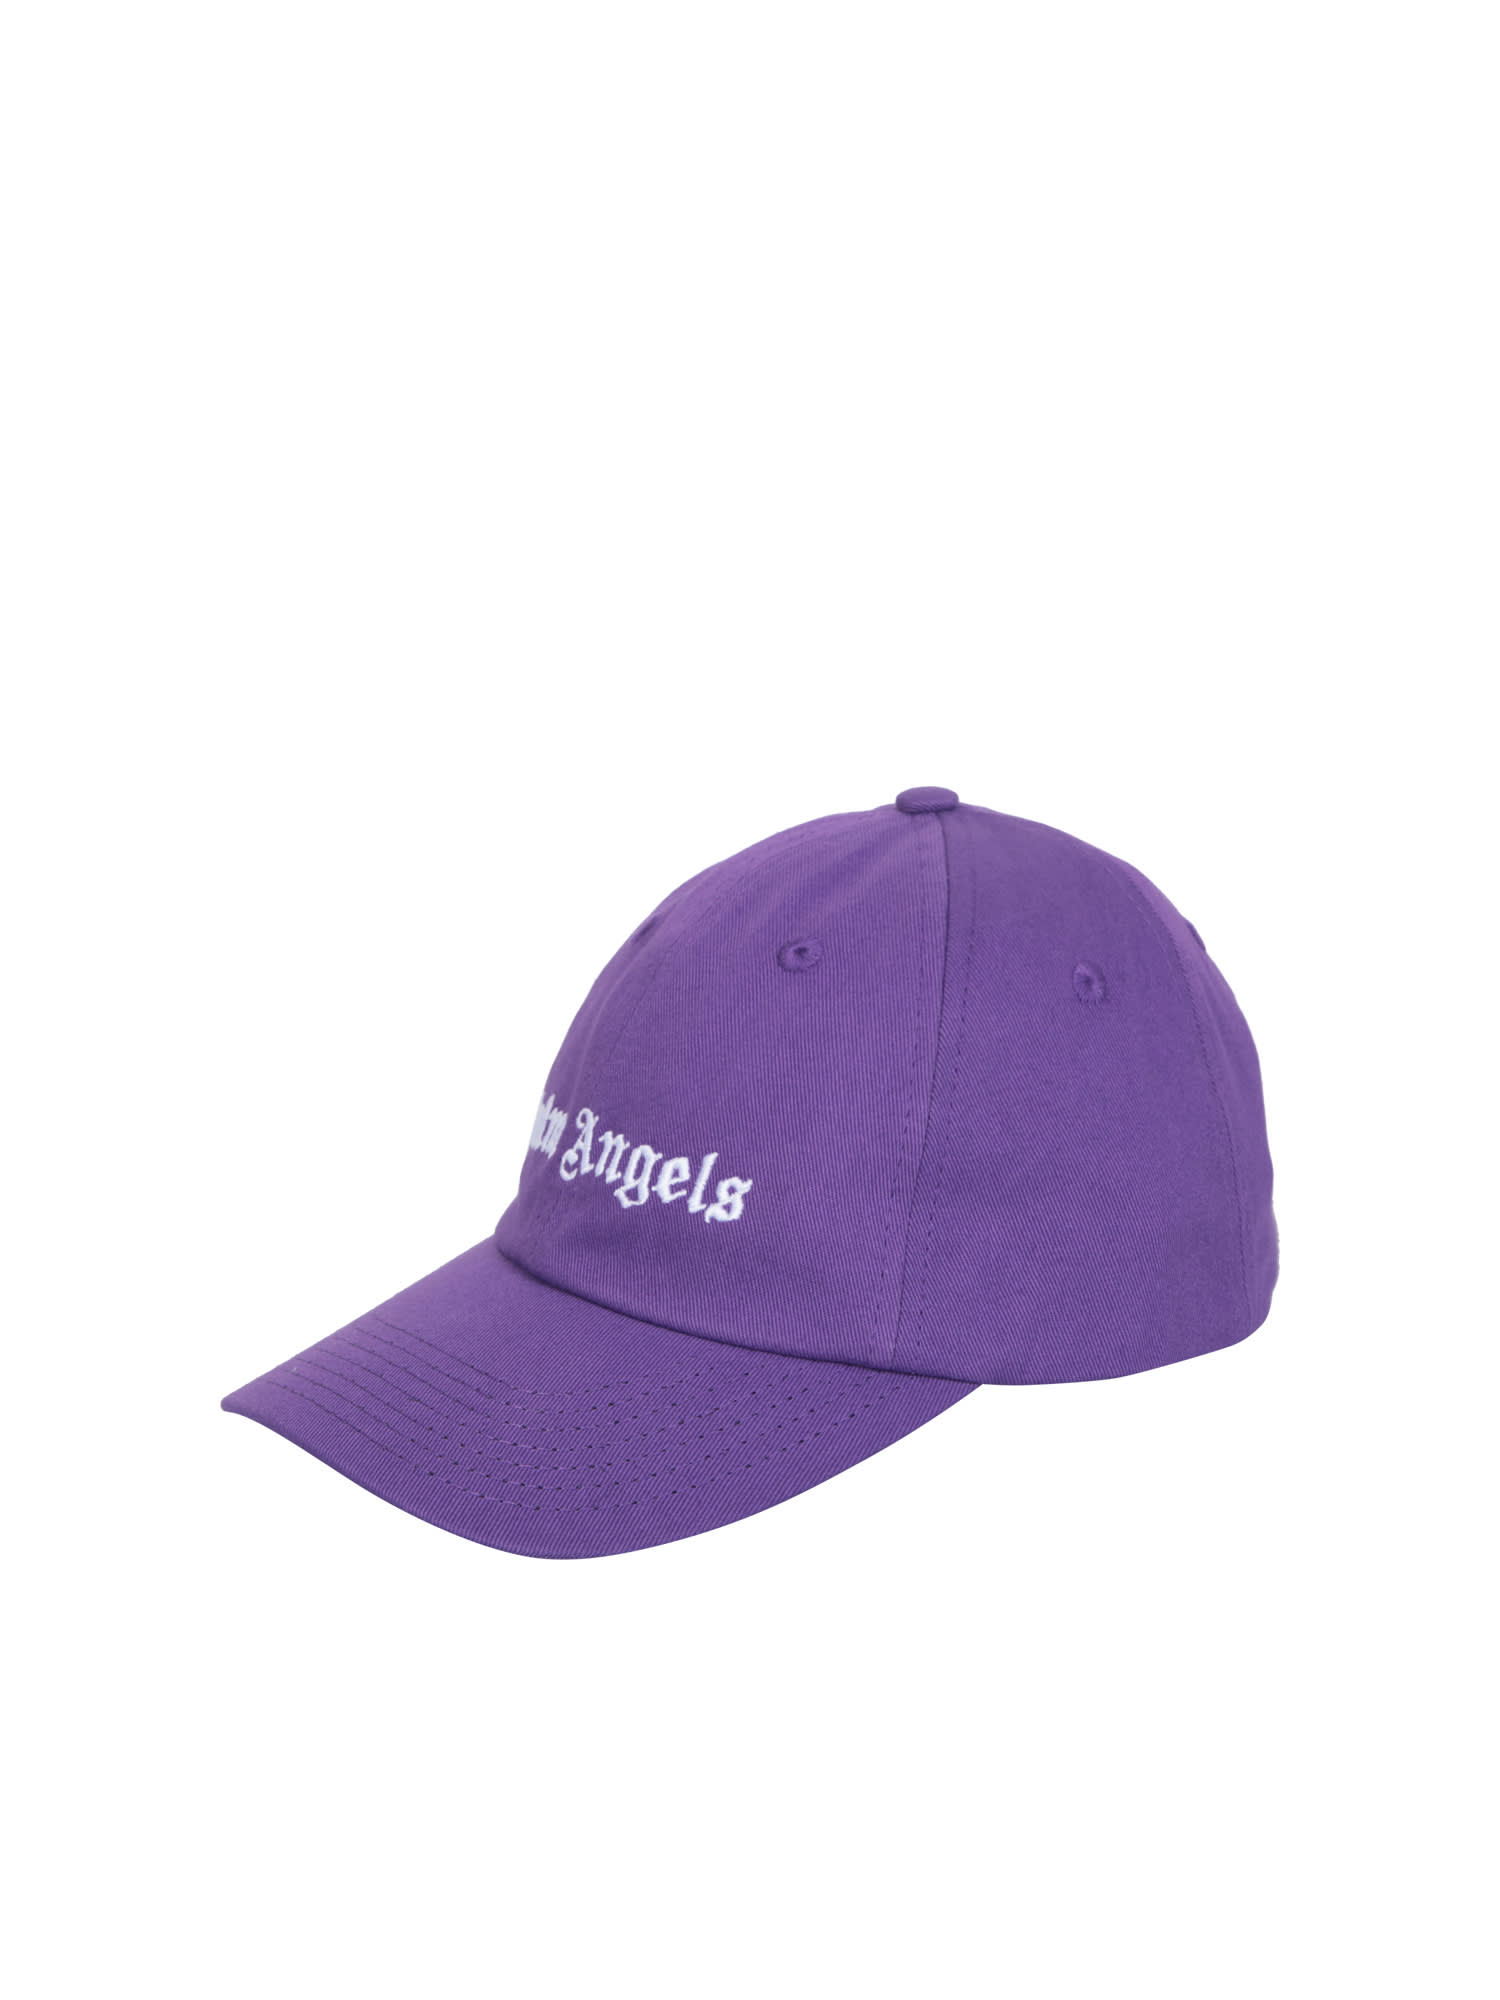 Palm Angels Embroidered Logo Purple Cap